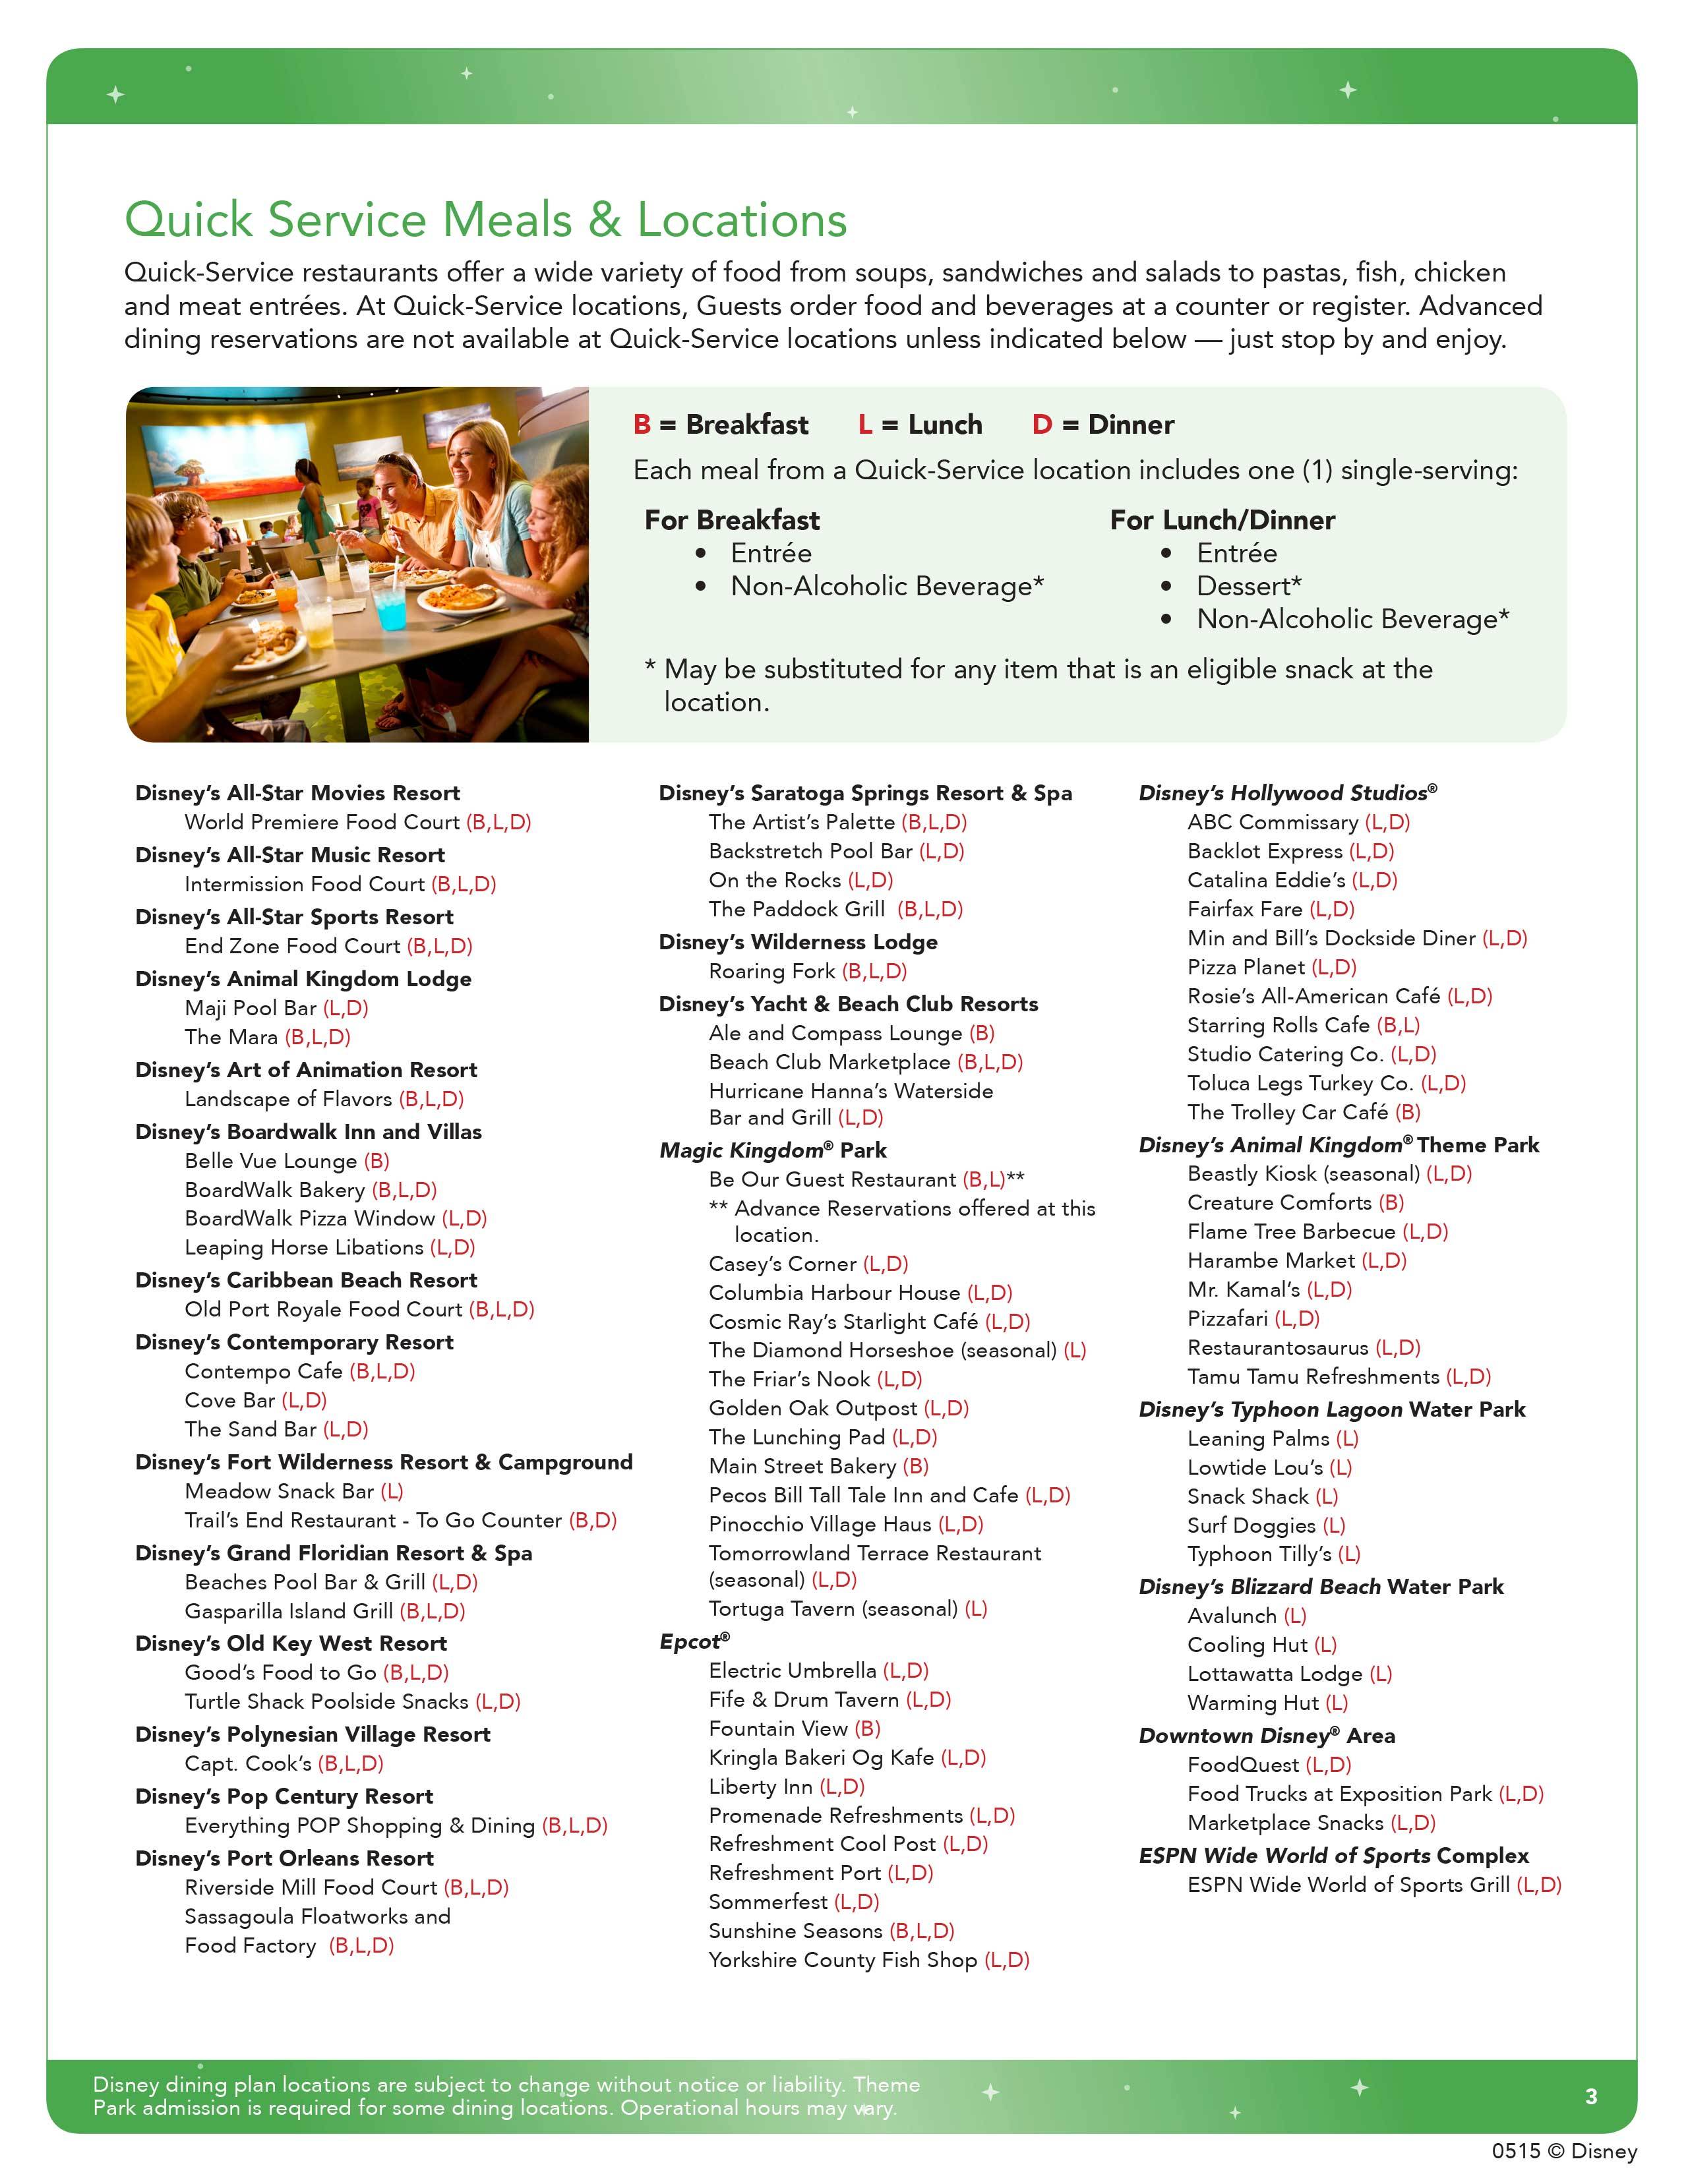 2016 Disney Quick Service Dining Plan brochure - Page 3